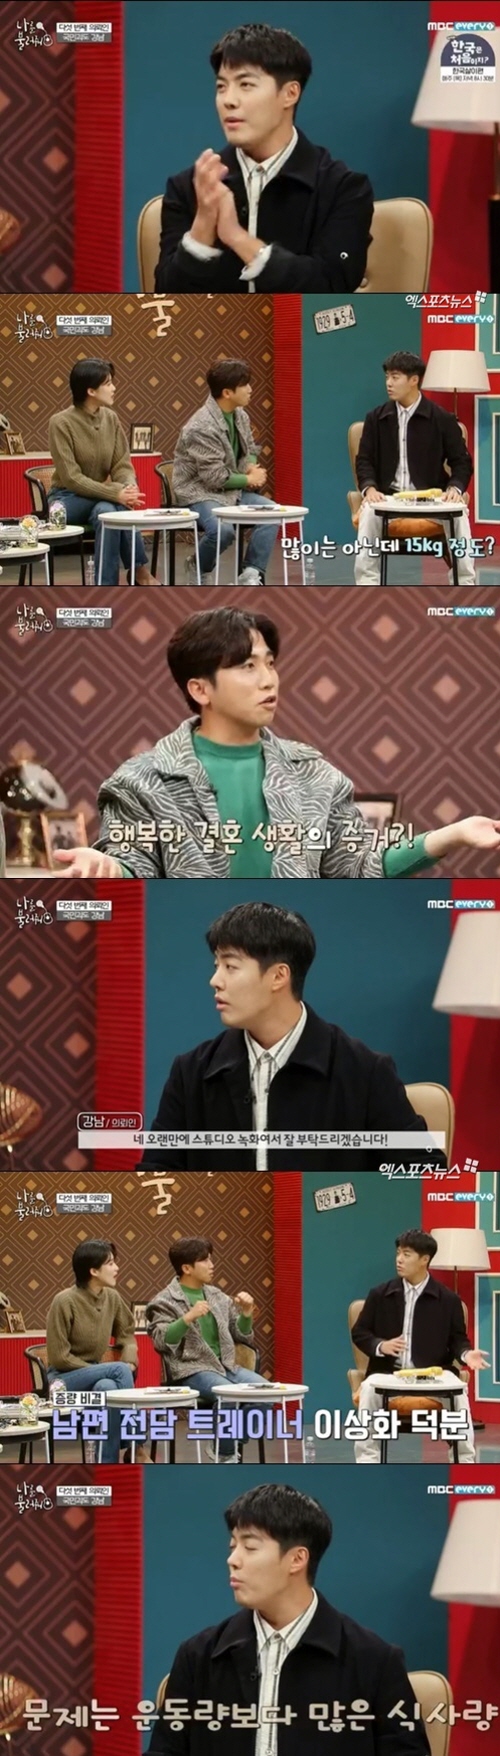 MBC Every, which aired on the 16th, featured as the husband of ice-skating actress Lee Sang-hwa and singer Gangnam District as the fifth client.Gangnam District said it was 15kg in the words that it was more fat than before.Yoo Se-yoon asked why he was having a heart: is it too good? Gangnam District said, Wife is on the Exercise side, so I make a lot of Exercise.But I eat more than that. Kim Jung-min said, My wife is doing Exercise or raising.Gangnam District said, Its been two years since marriage; were still newlyweds; many older brothers have changed their mood since the third year.Kim Jung-min said, We are newly married until three years. We must try each other after 10 years.Photo: MBC Every One Broadcasting Screen